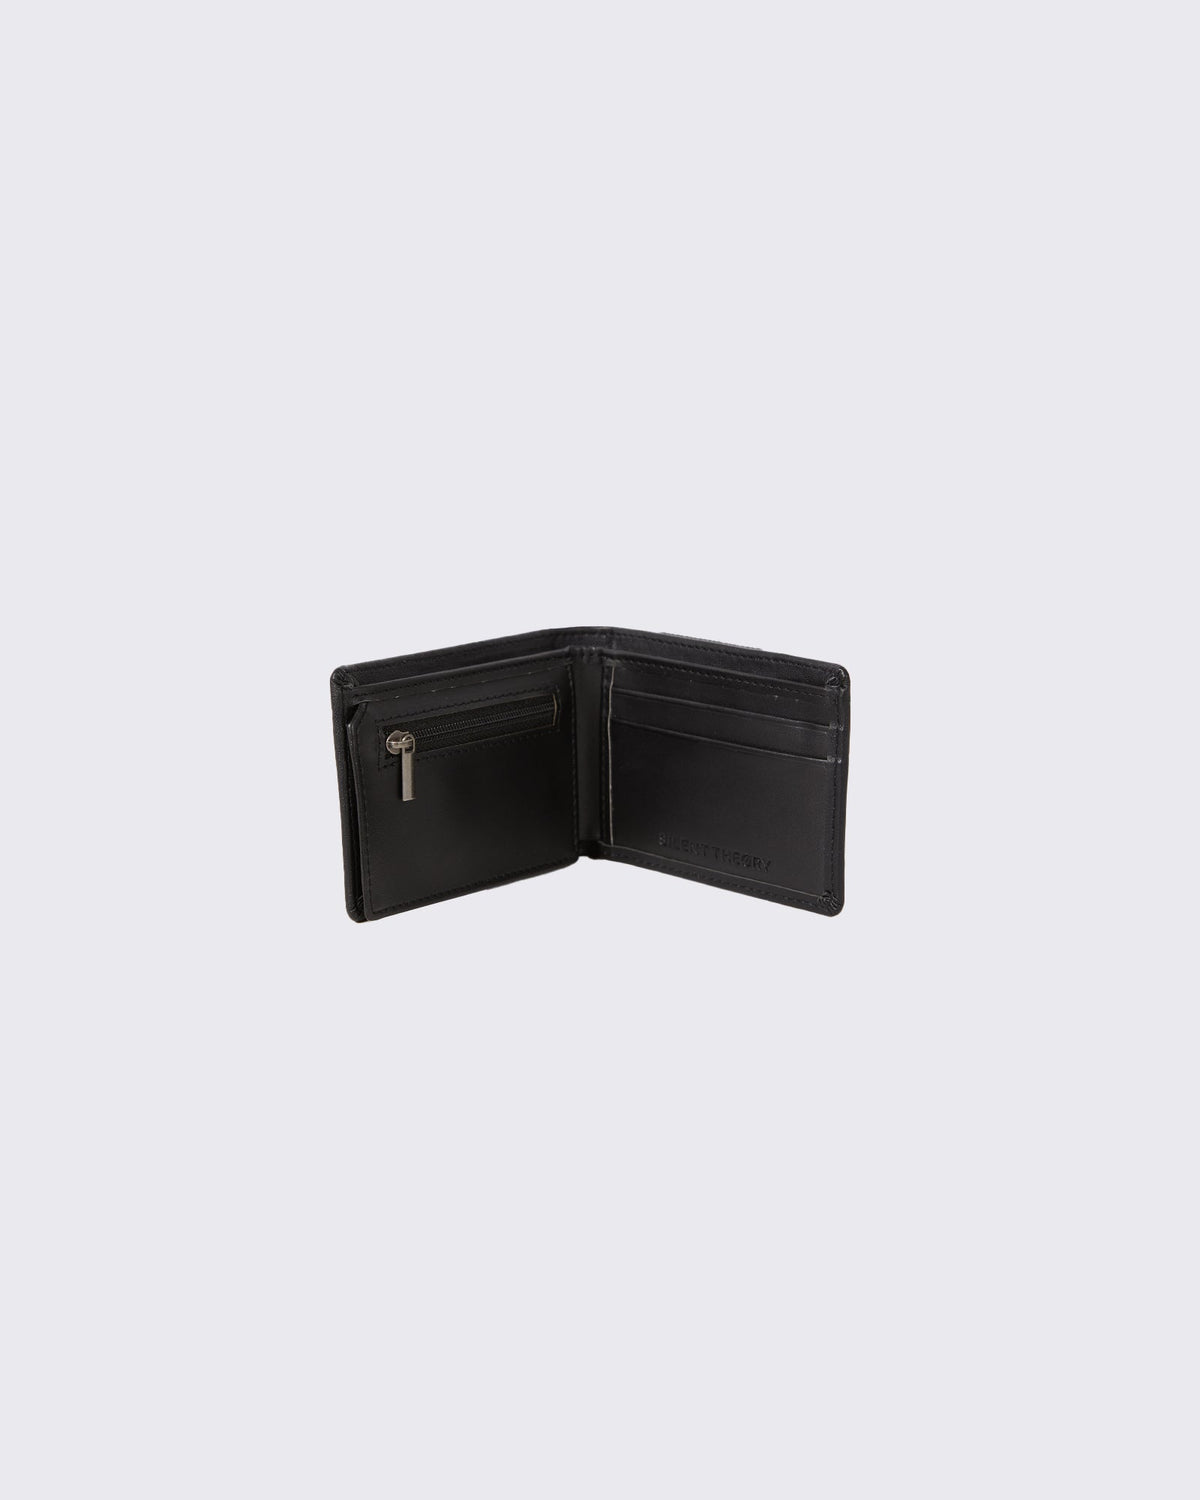 Silent Theory-Essential Coin Fold Wallet Black-Edge Clothing